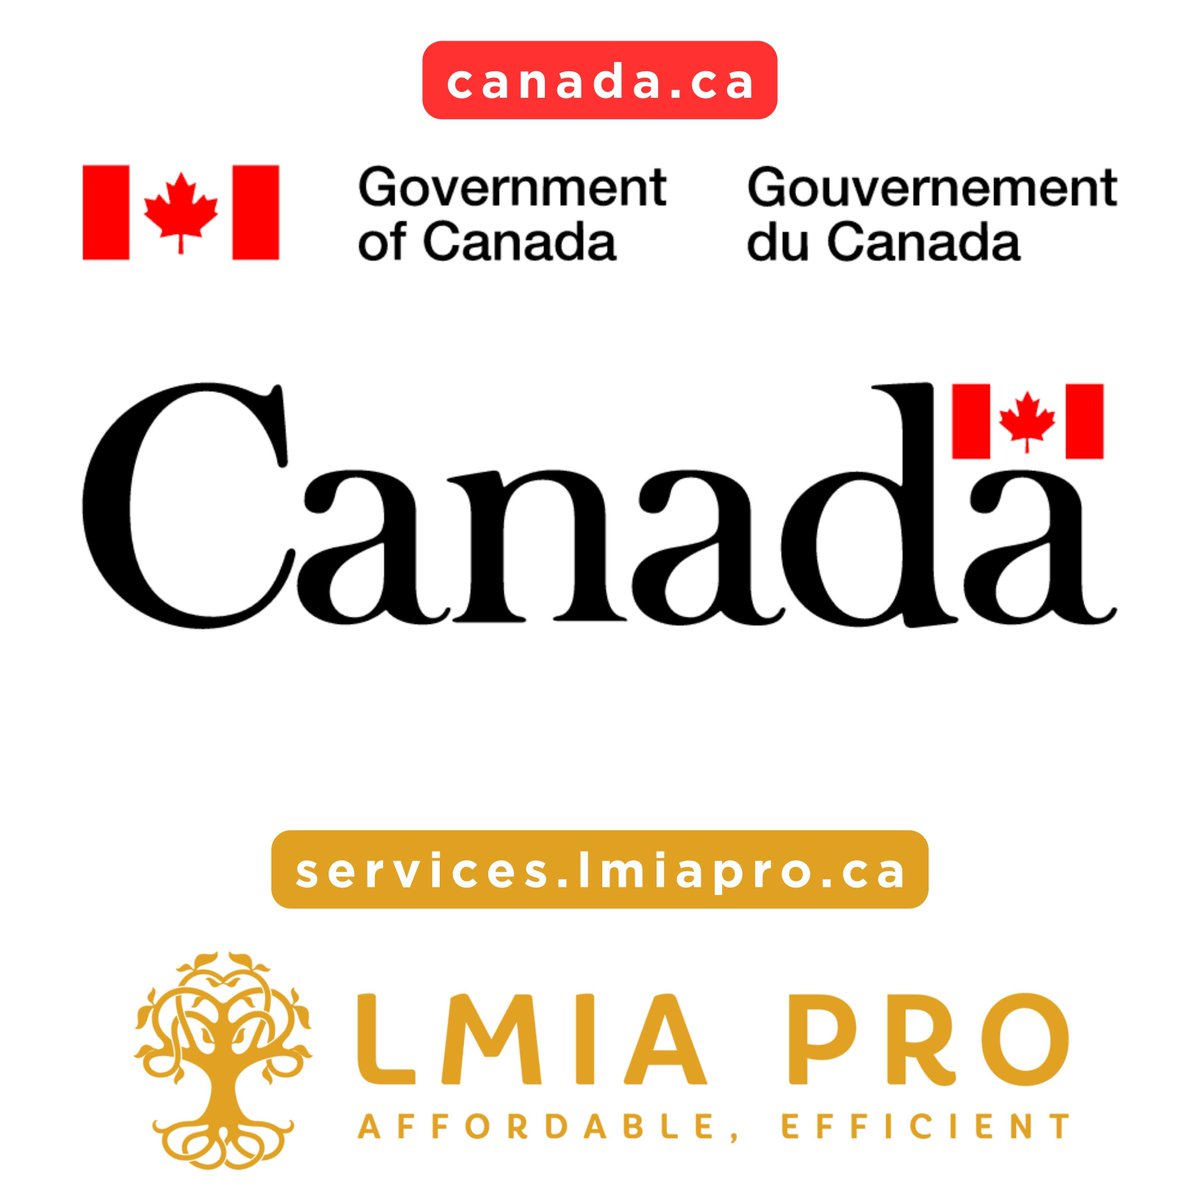 Interested in #workinginCanada, #immigrationtoCanada, or #traveltoCanada? Make sure you get accurate information from legitimate sources! Visit Canada.ca, the official website of the Government of Canada, or a Certified Immigration Consultant buff.ly/3psQ47C